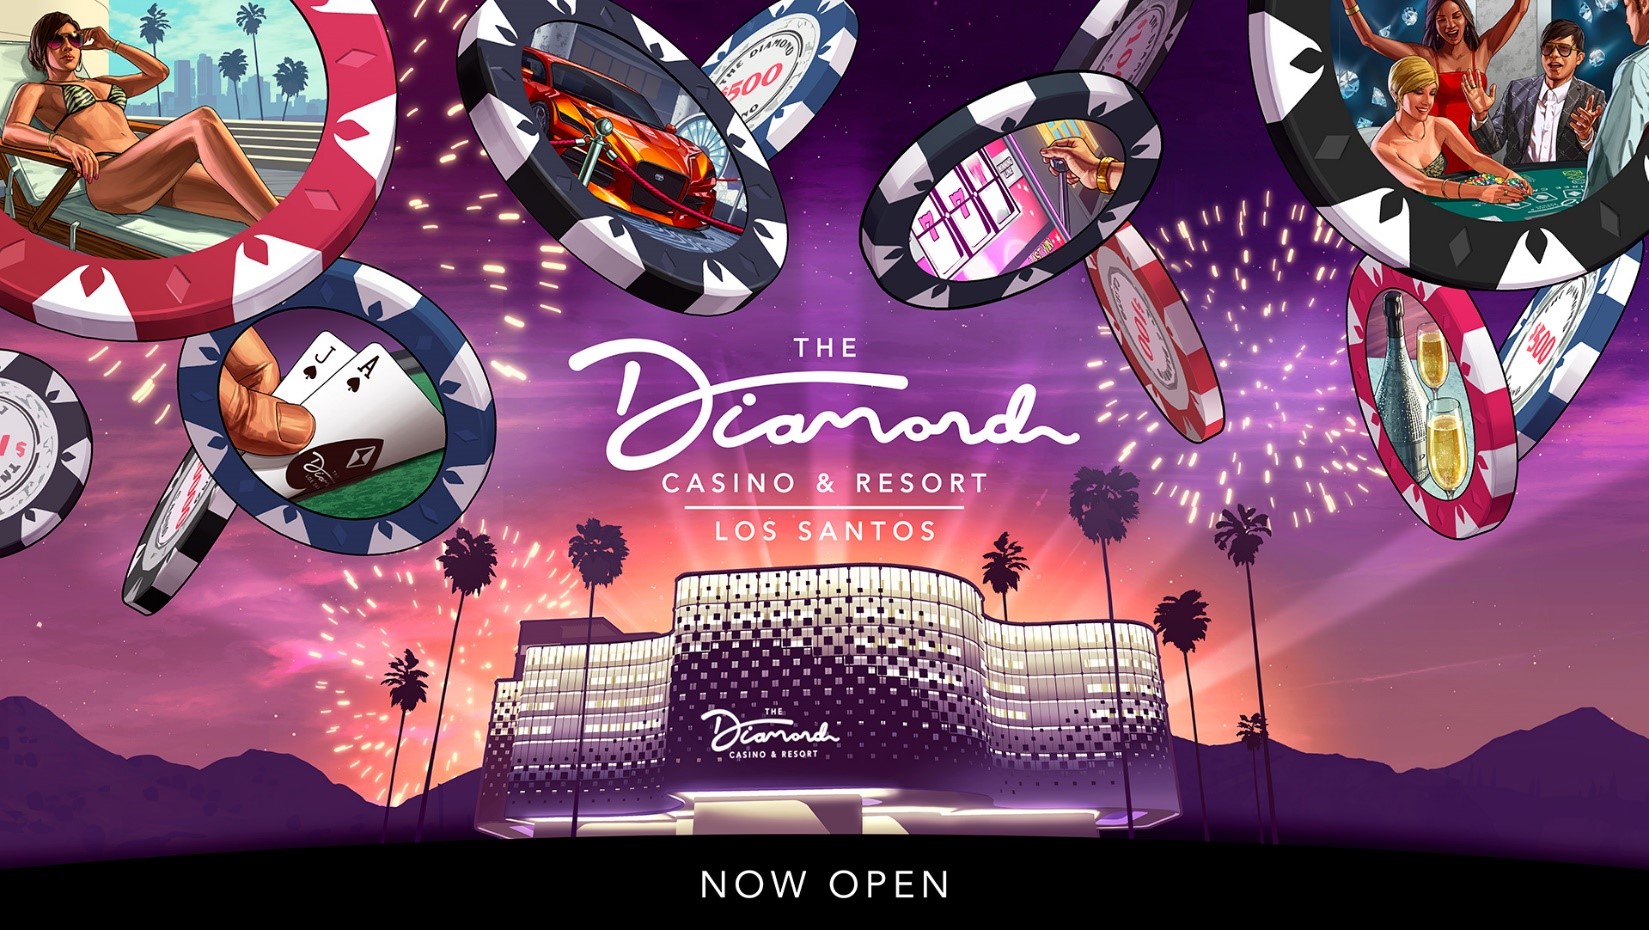 Announcing The Grand Opening Of The Diamond Casino And Resort In Gta Online On Xbox One Xbox Wire